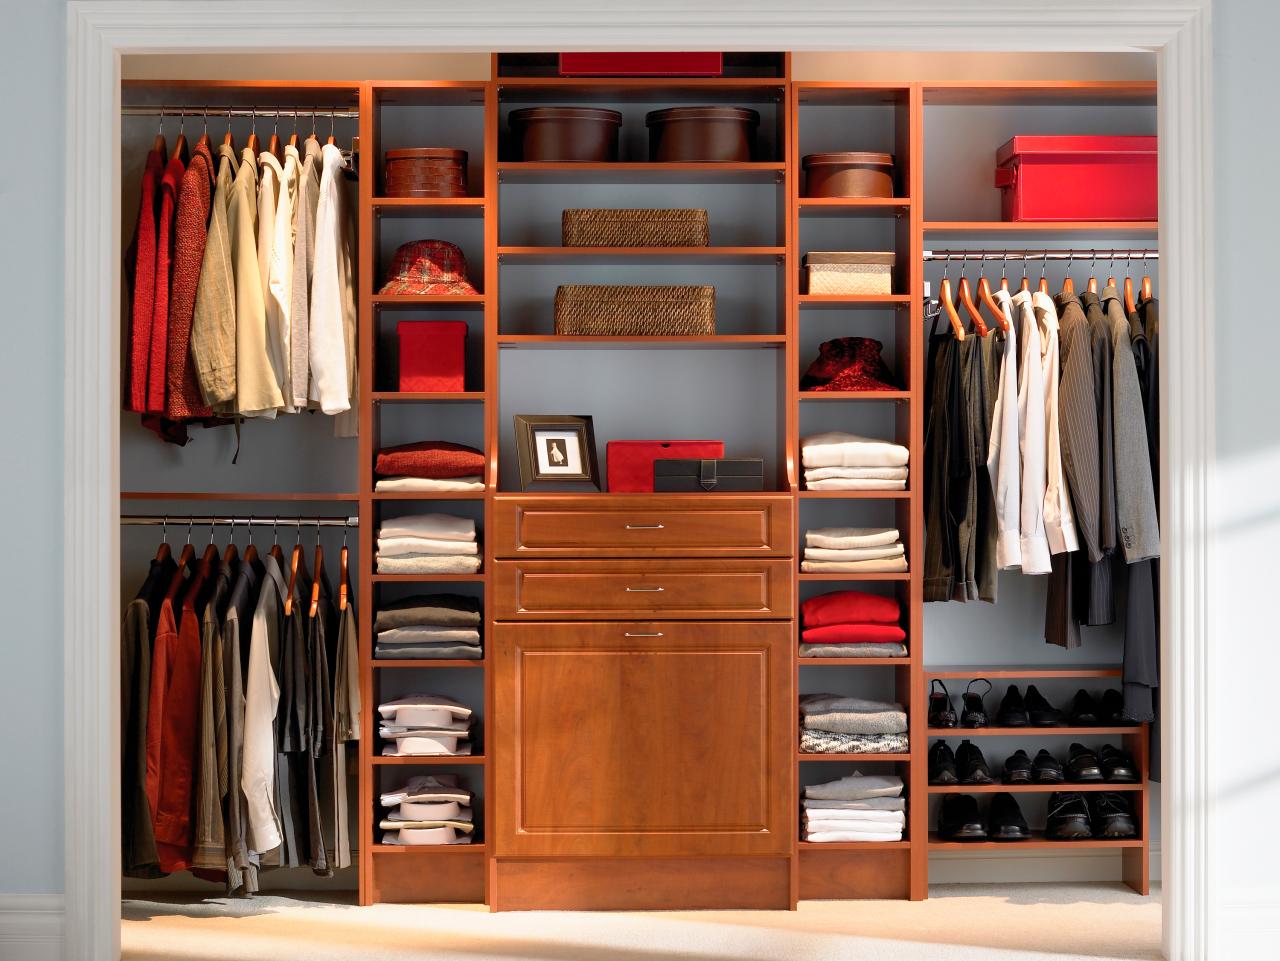 Master Closet in Warm Colors